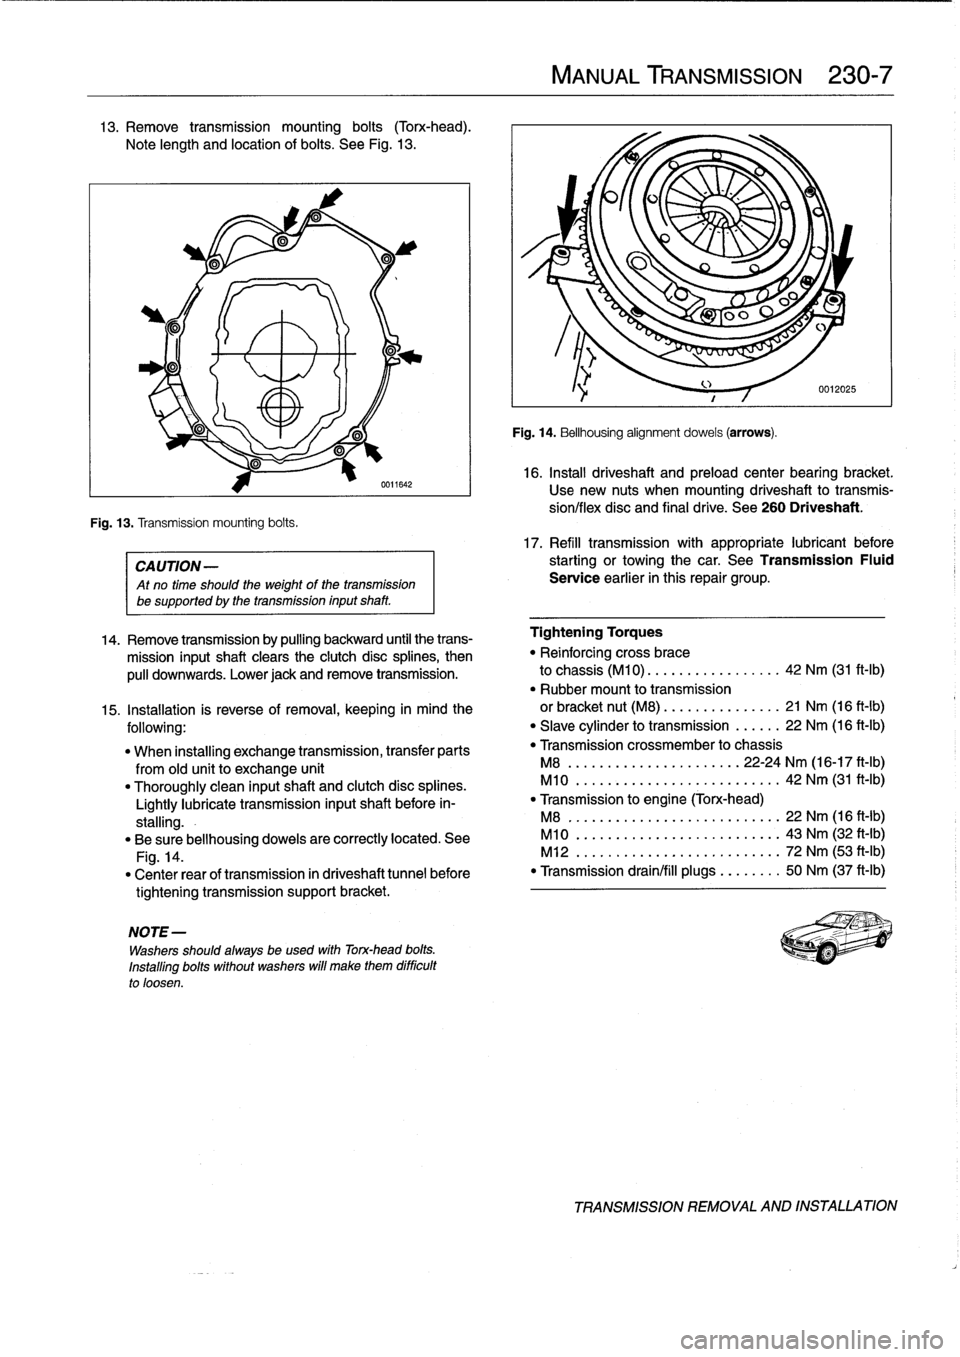 BMW 328i 1994 E36 Workshop Manual 13
.
Remove
transmission
mounting
bolts
(Torx-head)
.

Note
length
and
location
of
bolts
.
See
Fig
.
13
.

Fig
.
13
.
Transmission
mounting
bolts
.

0611642

CA
UTION-

Atno
time
should
the
weight
of
